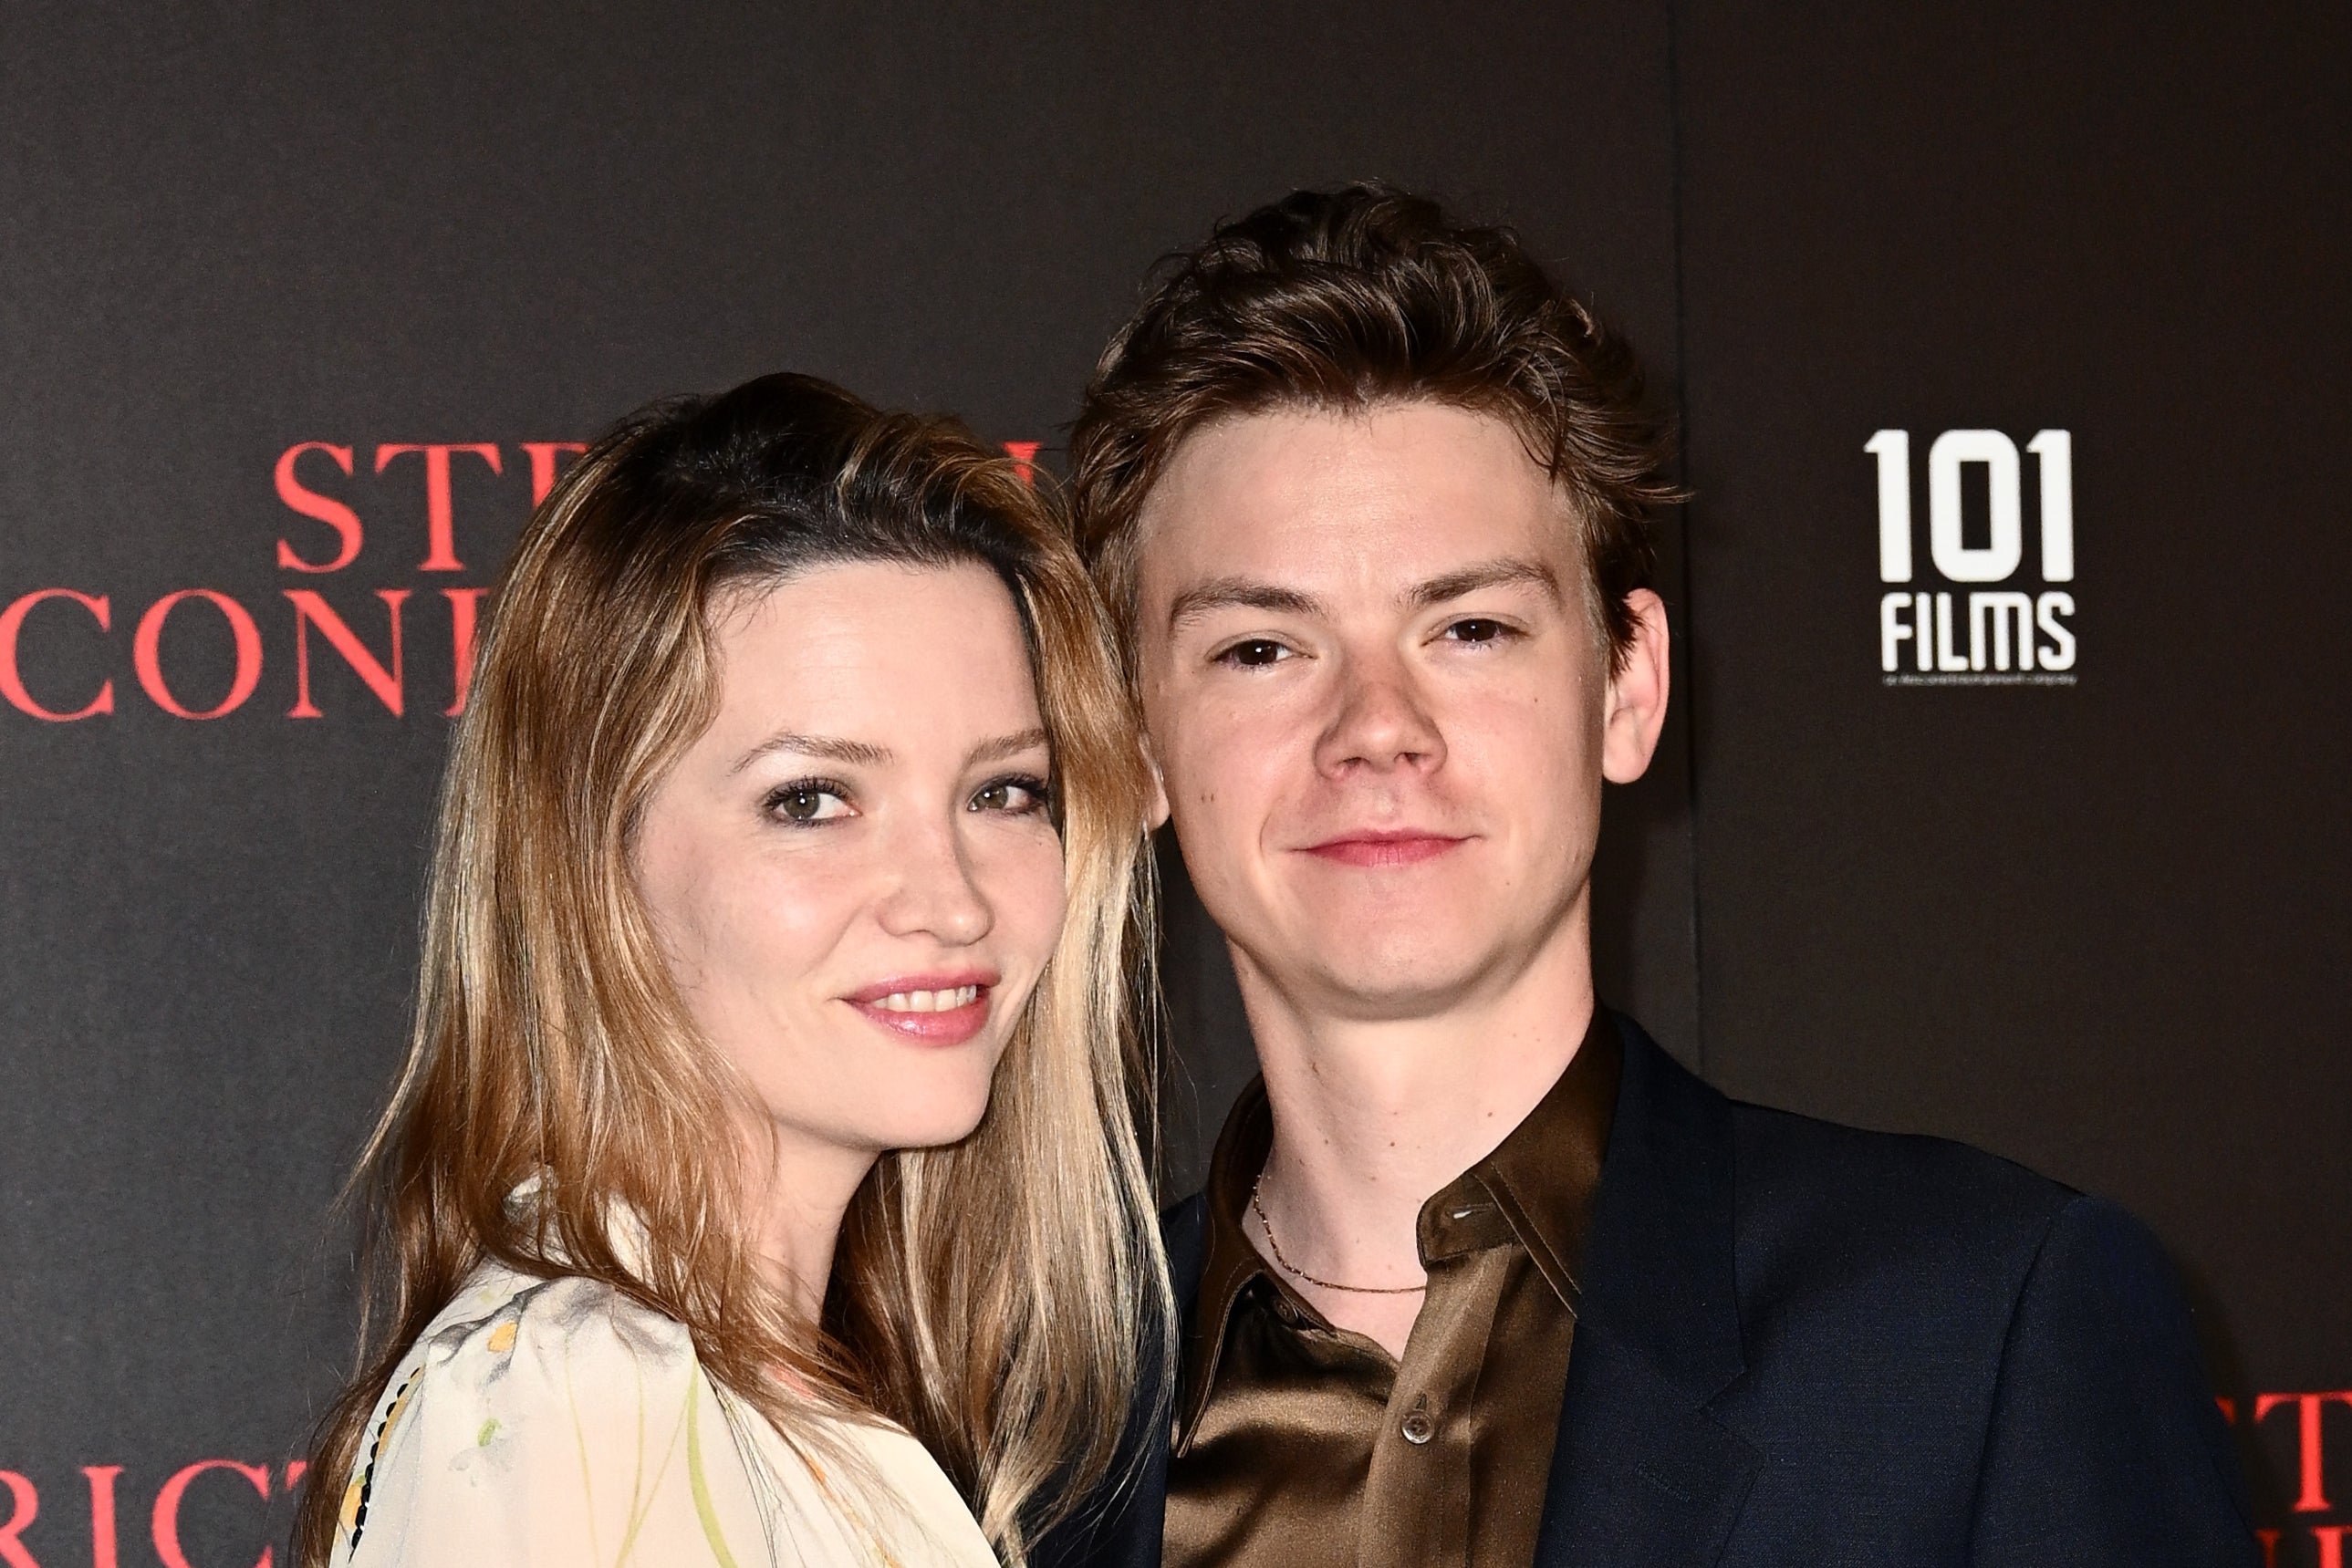 Brodie-Sangster said 'love is everywhere' in engagement announcement